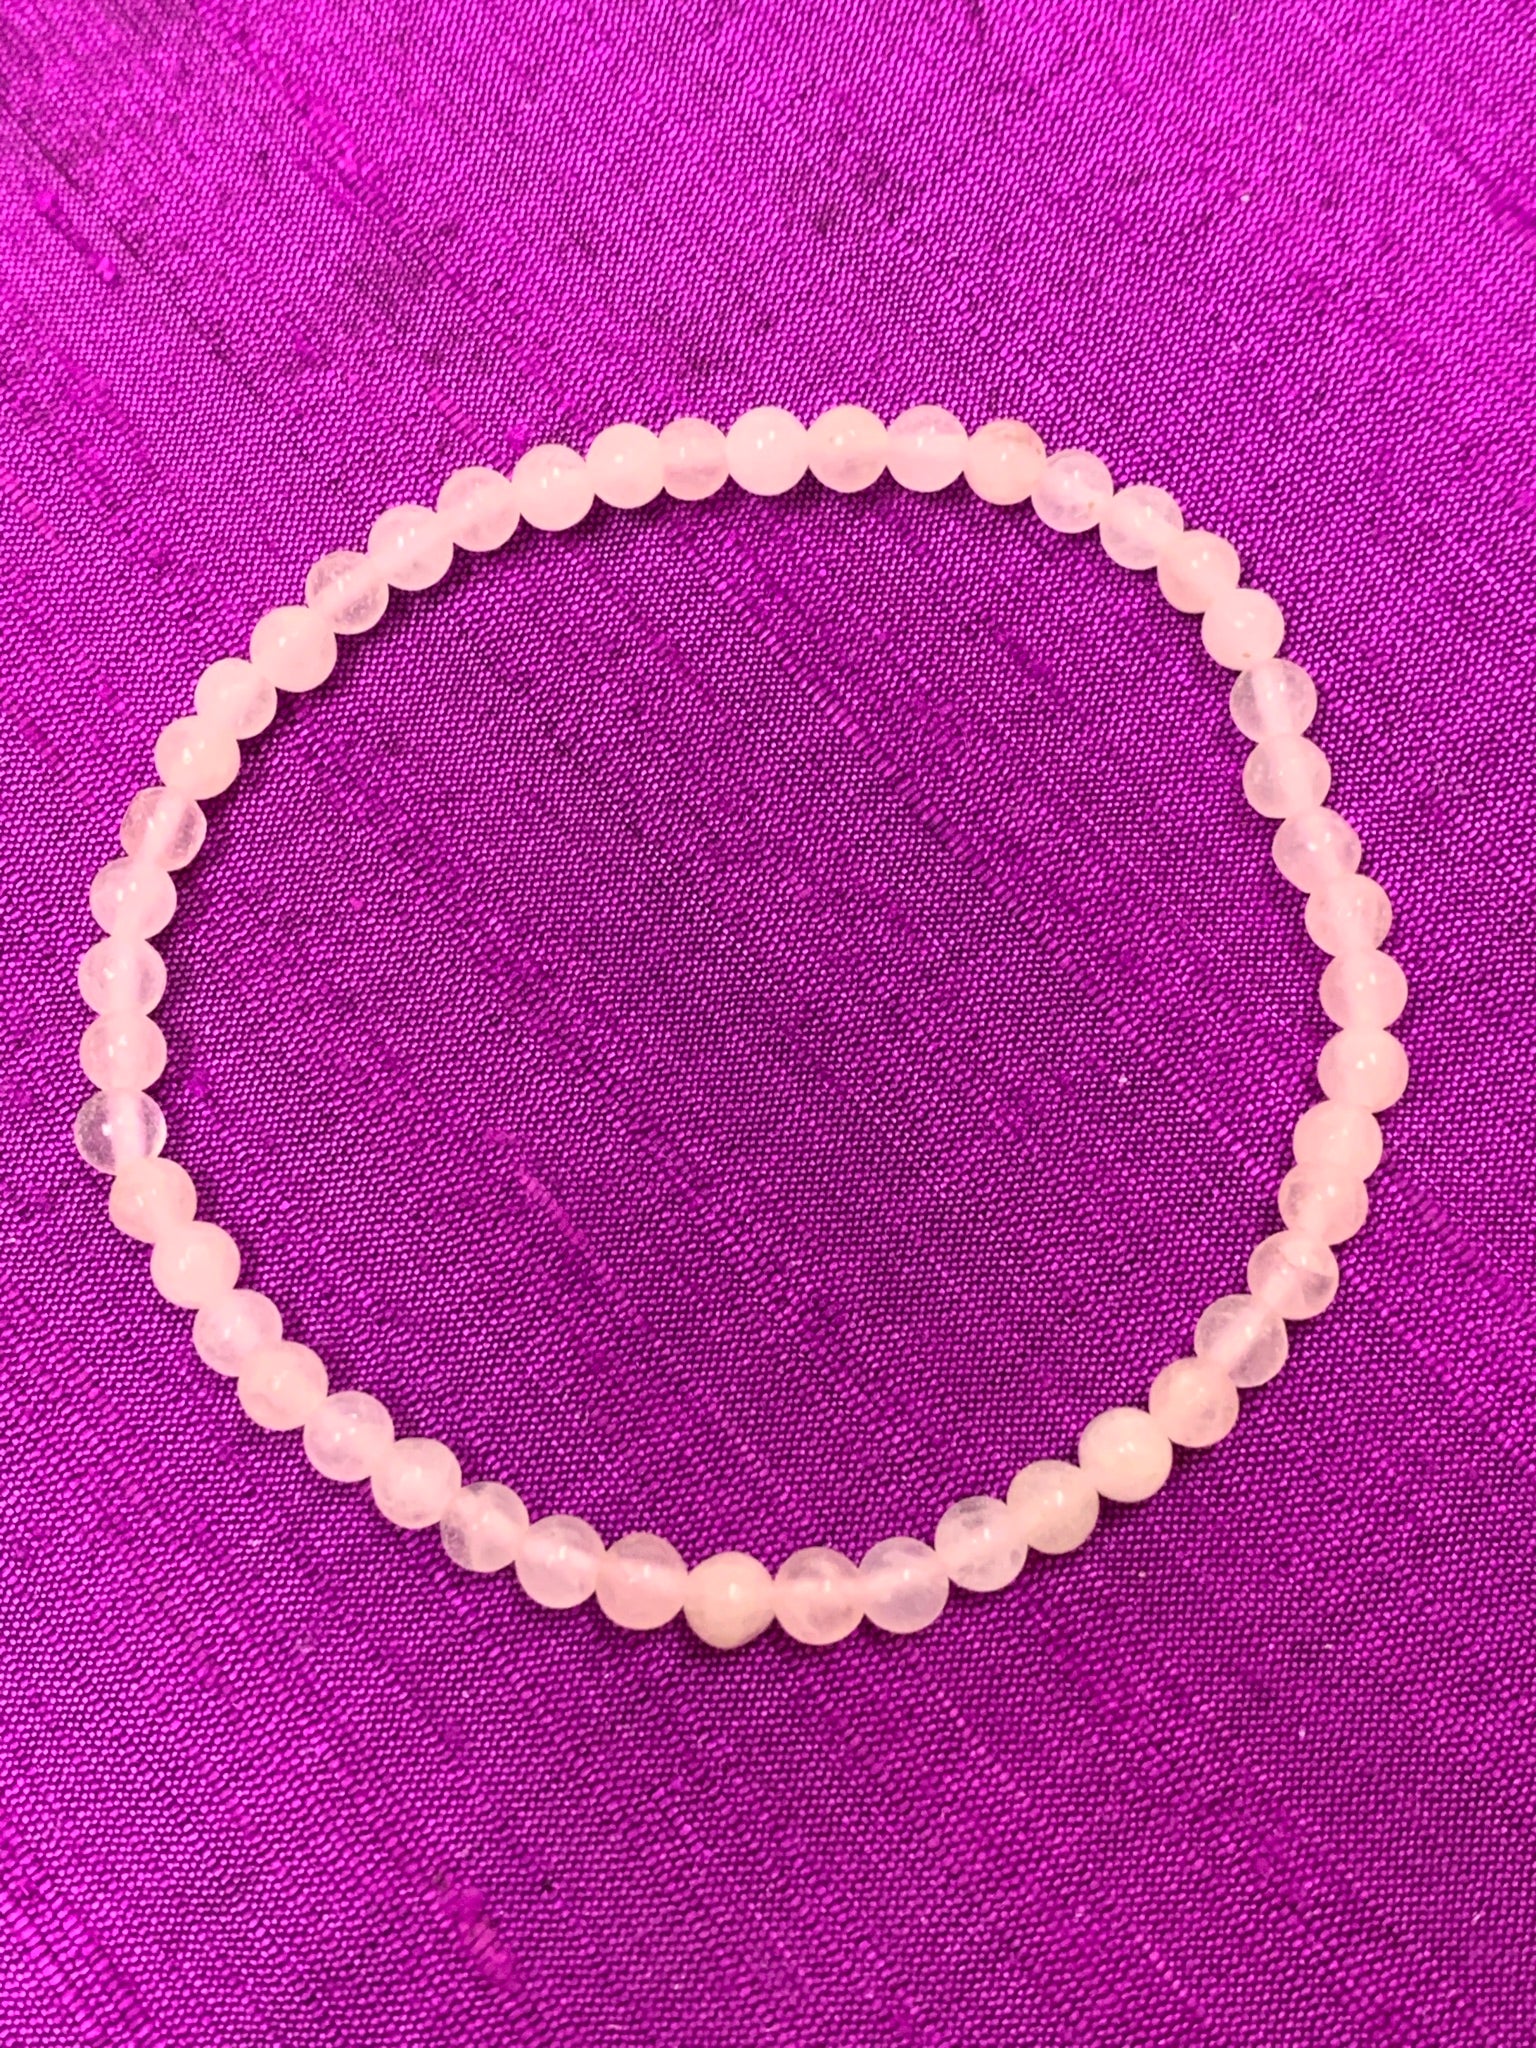 Close-up view. Petite rose quartz power bracelet. Beads are 4mm. Tiny and mighty, these bracelets put the soft power of rose quartz right around your wrist. Buy one or buy several and wear and share them with friends or family - we have a variety of gemstone choices.